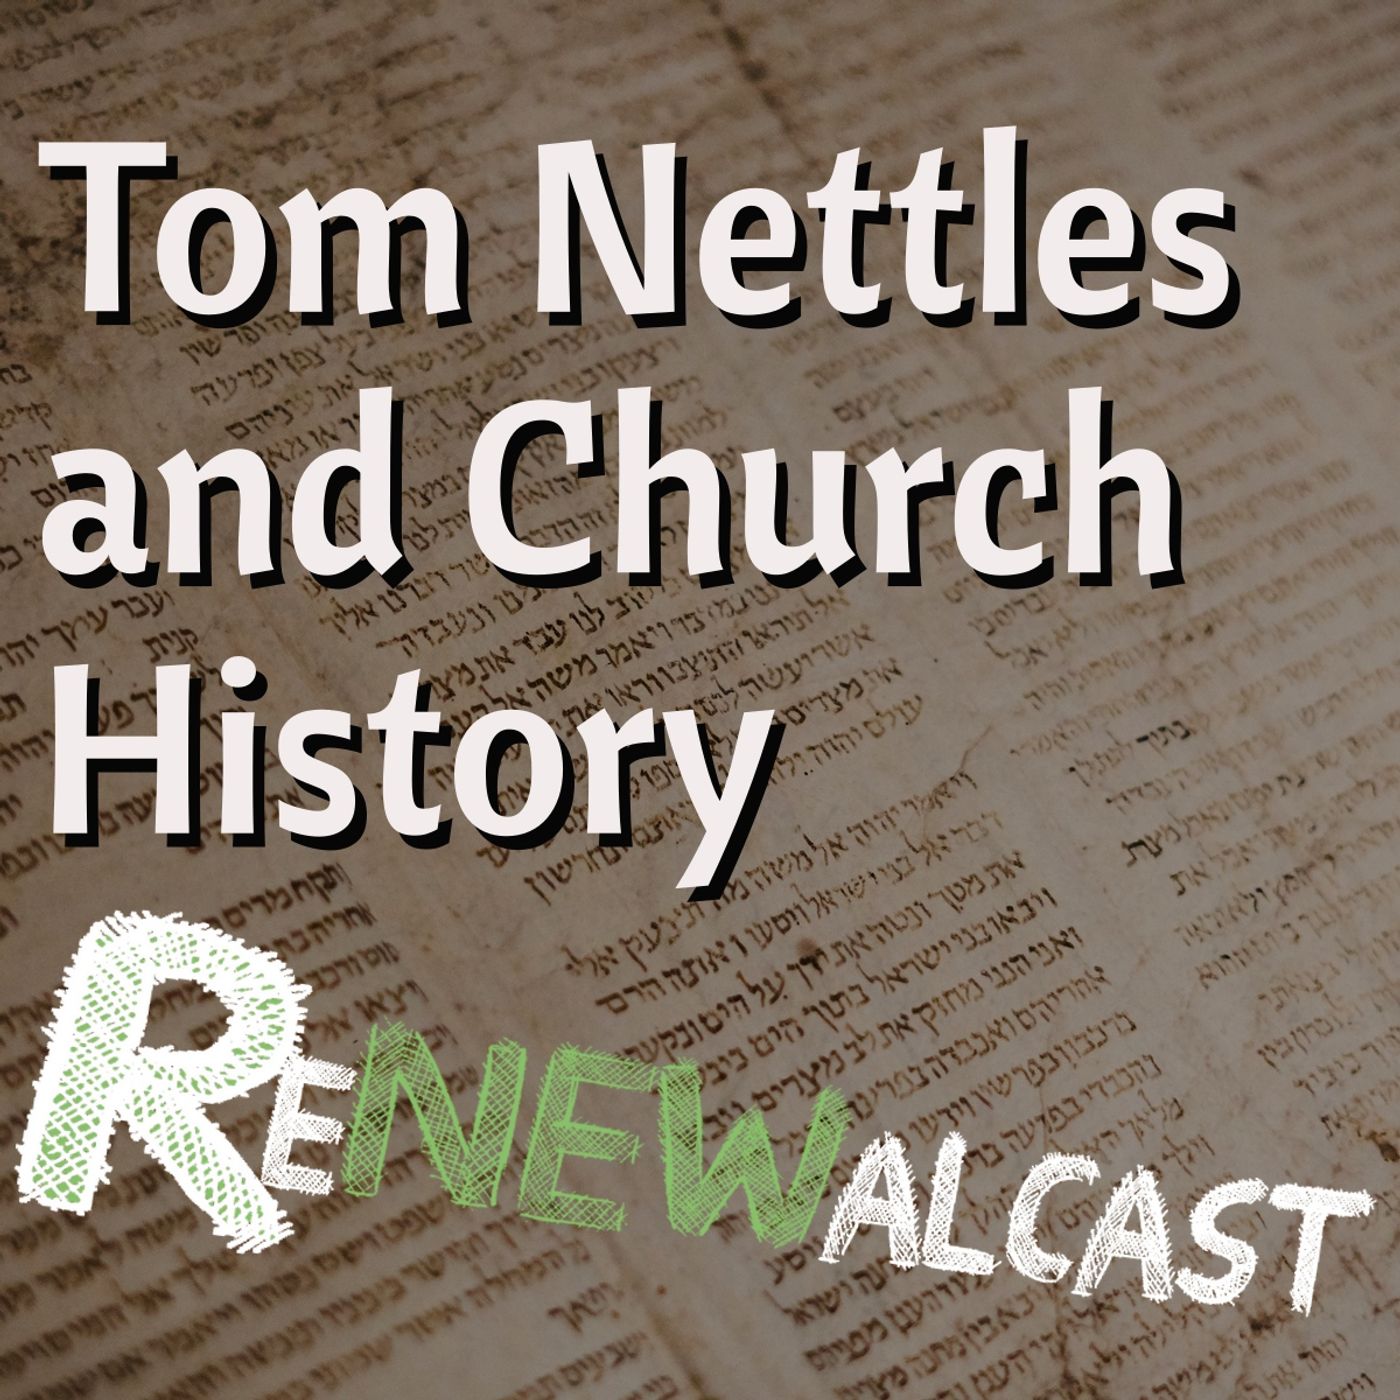 Tom Nettles and Church History